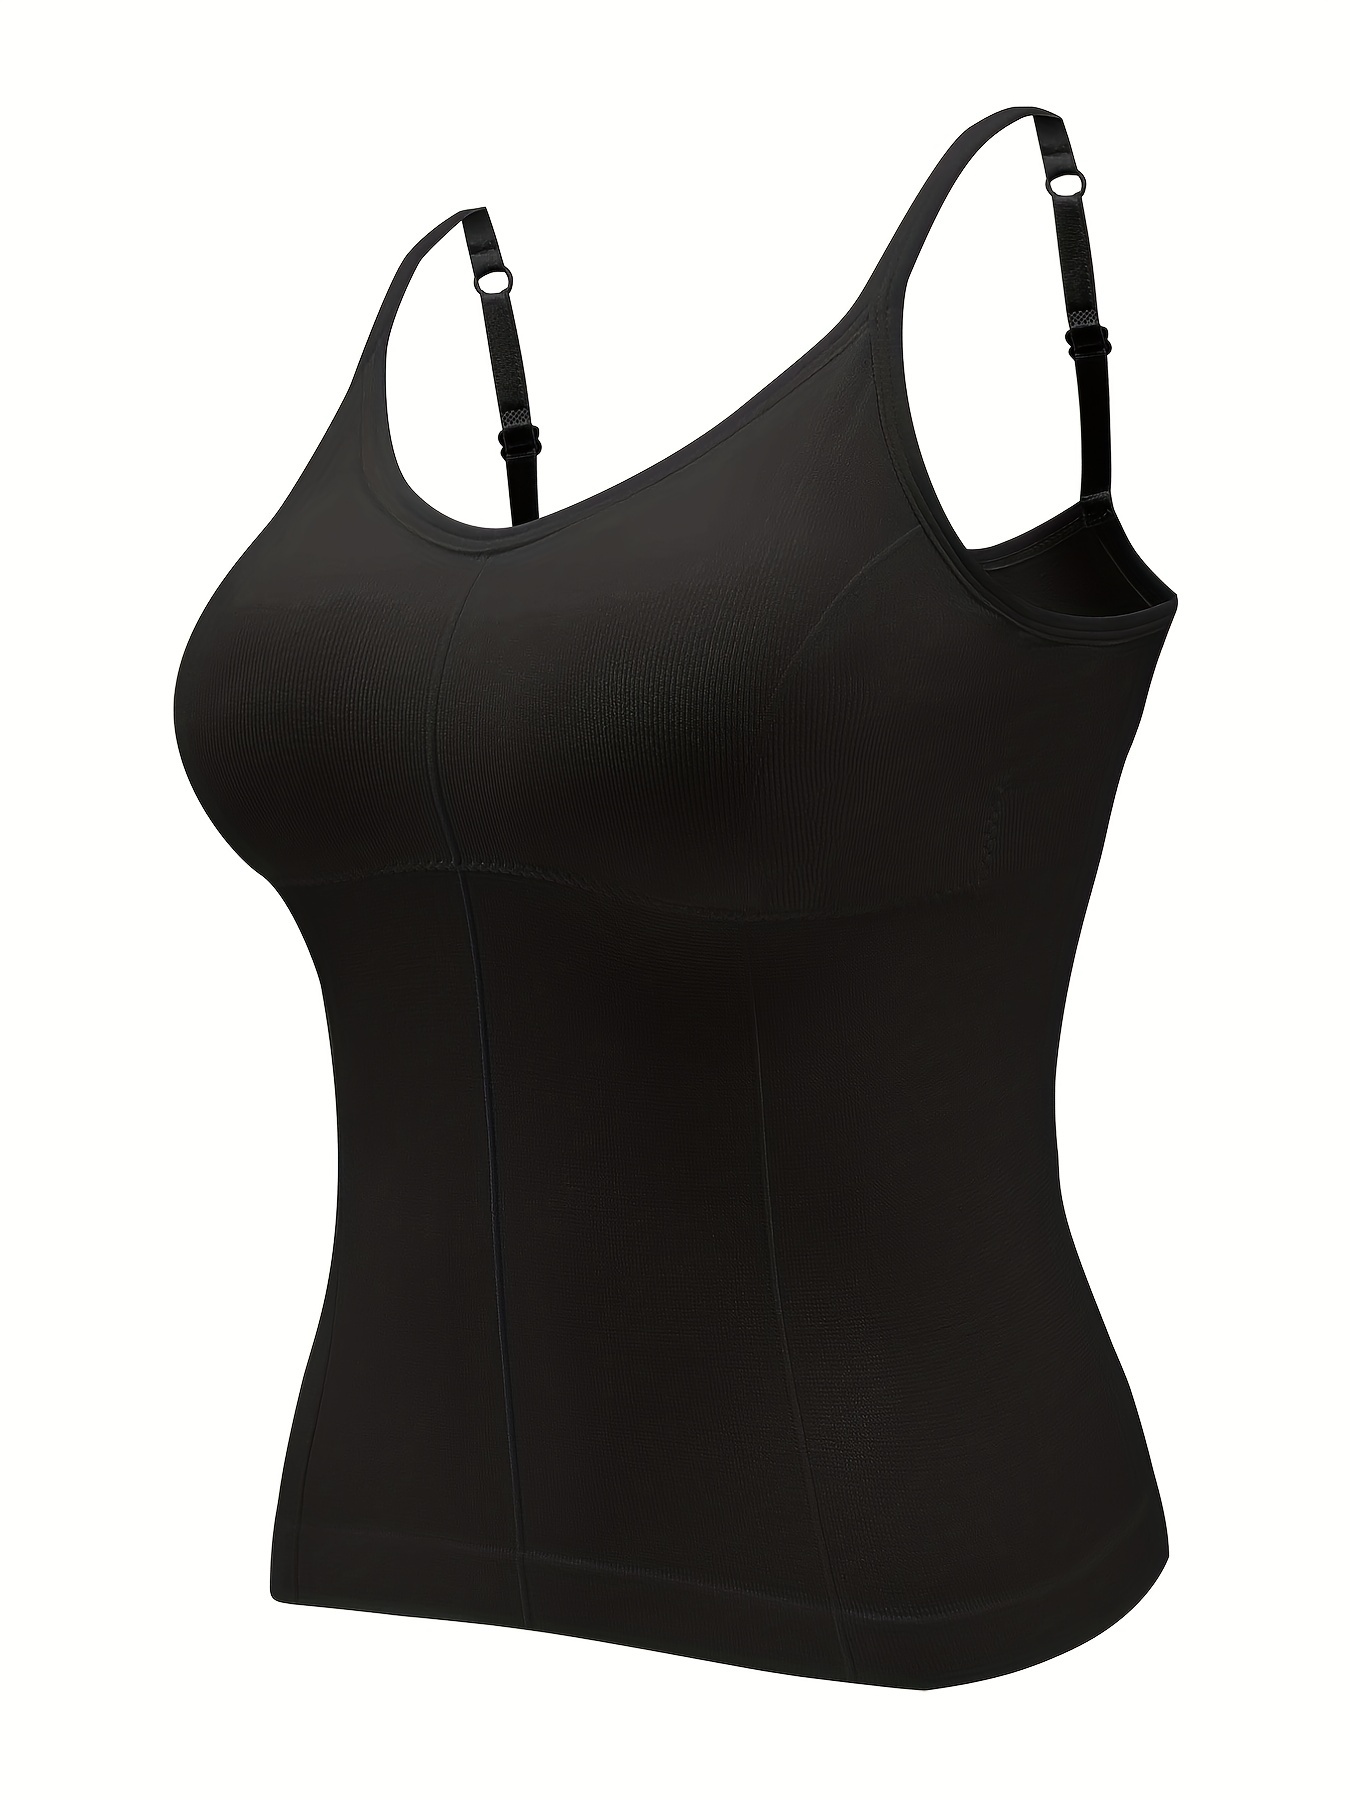 Women's Seamless Camisole with Built in Padded Bra Basic